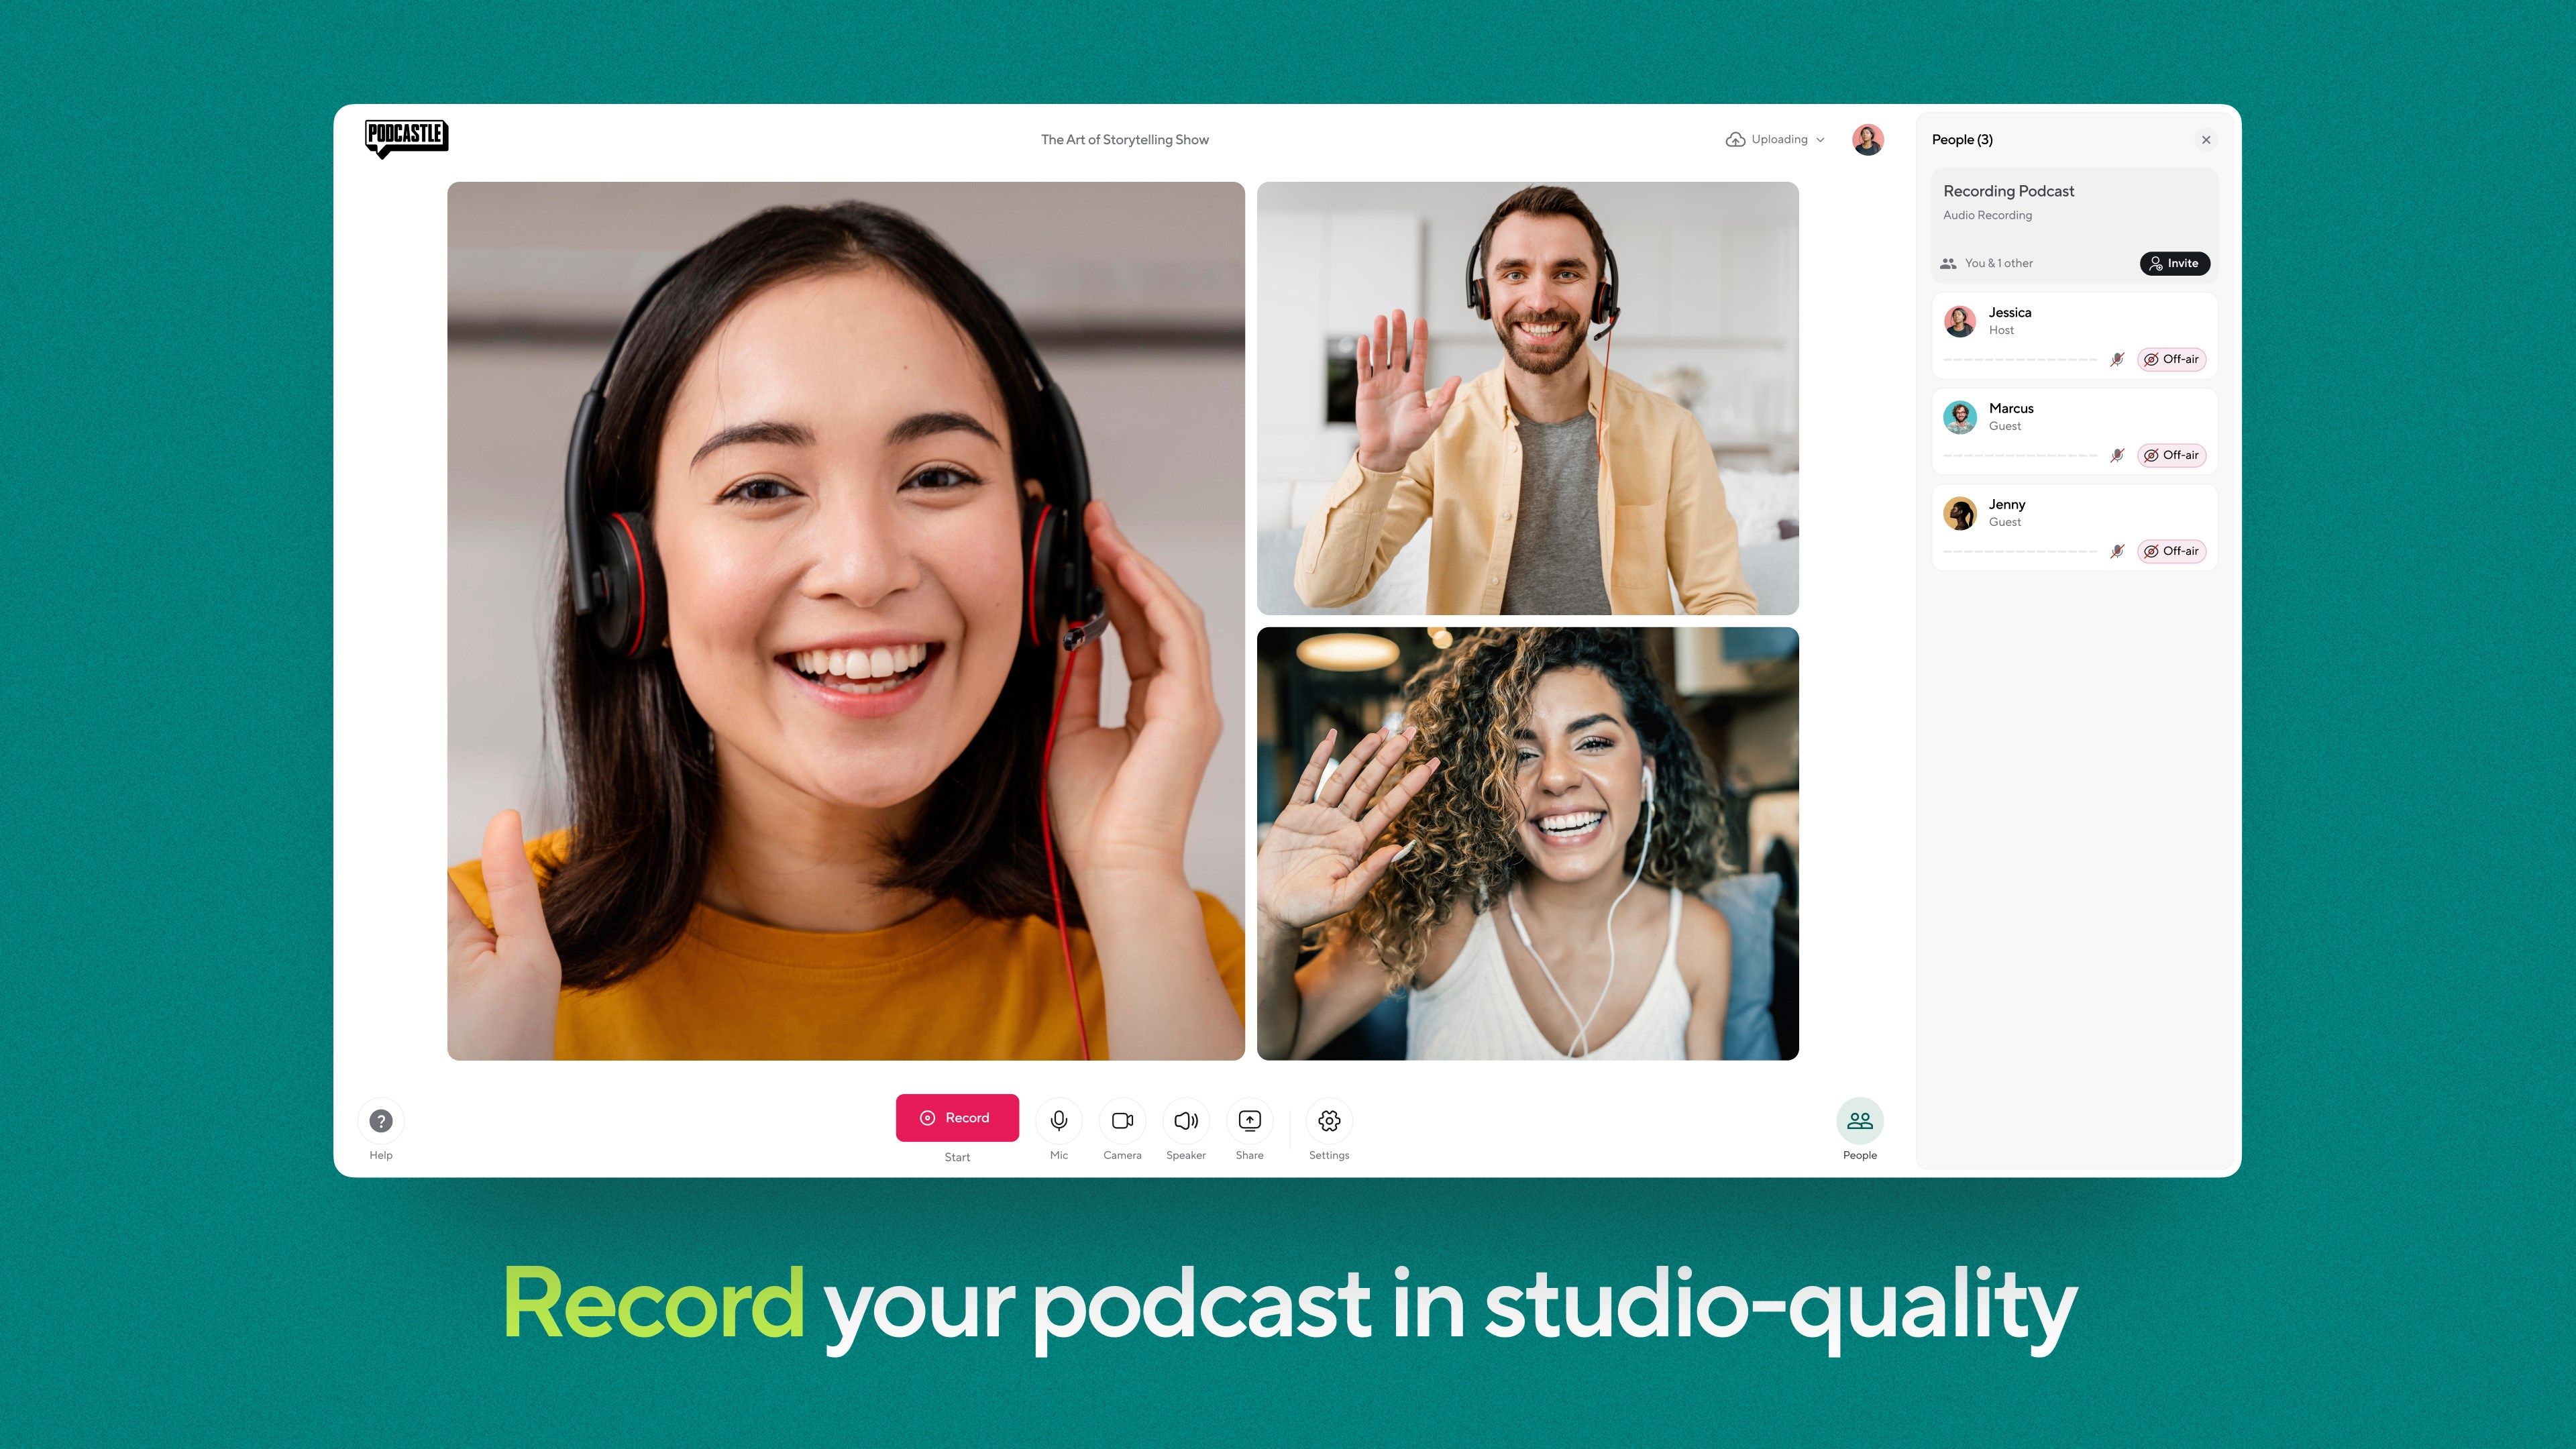 Record your podcast in studio-quality